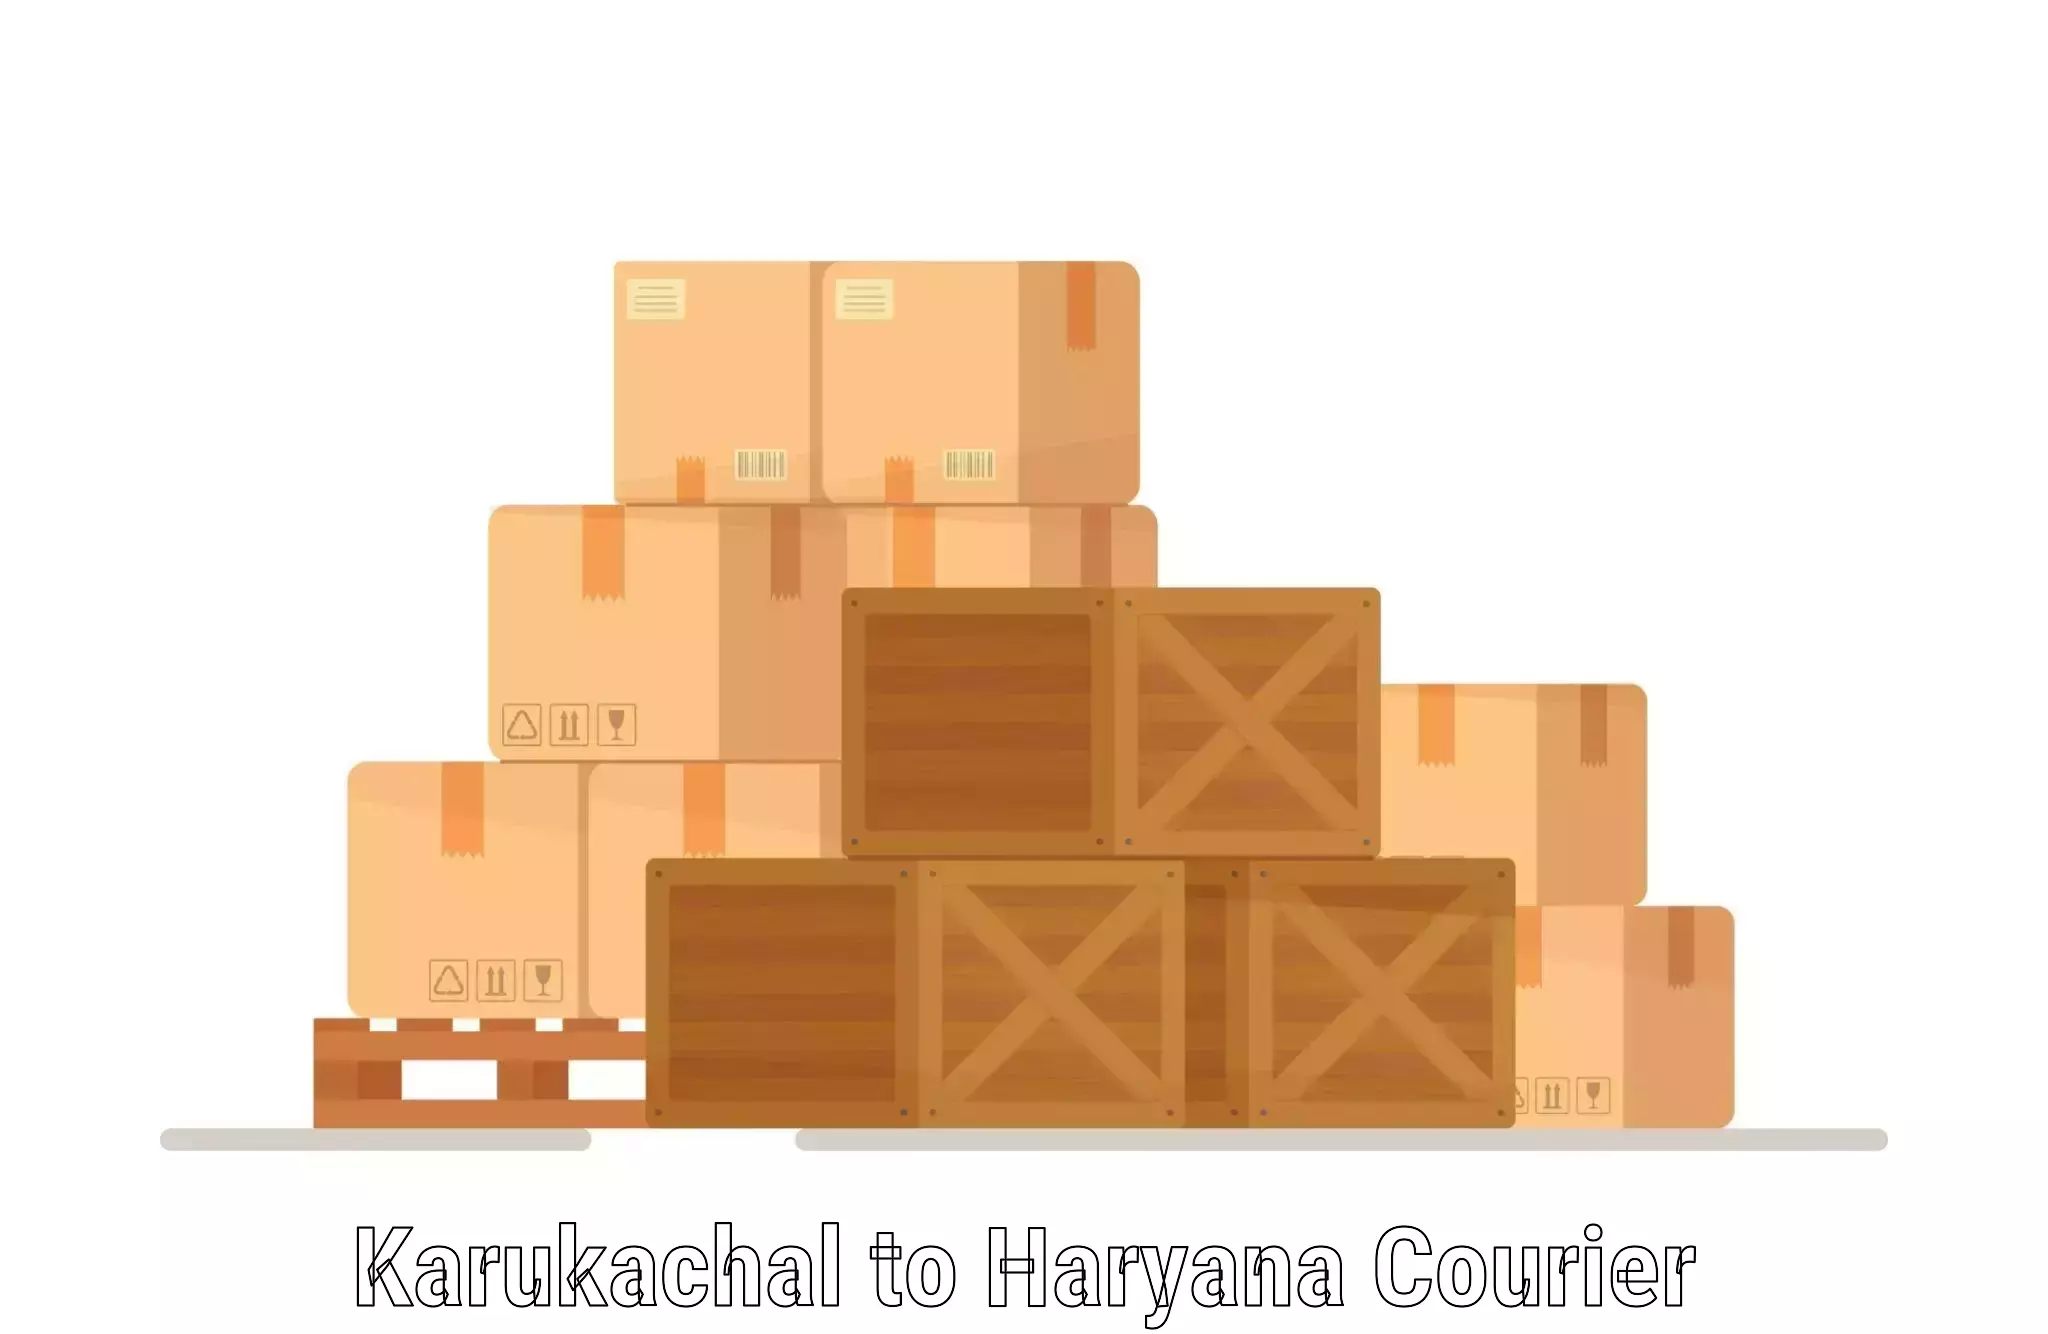 Efficient shipping operations Karukachal to Odhan